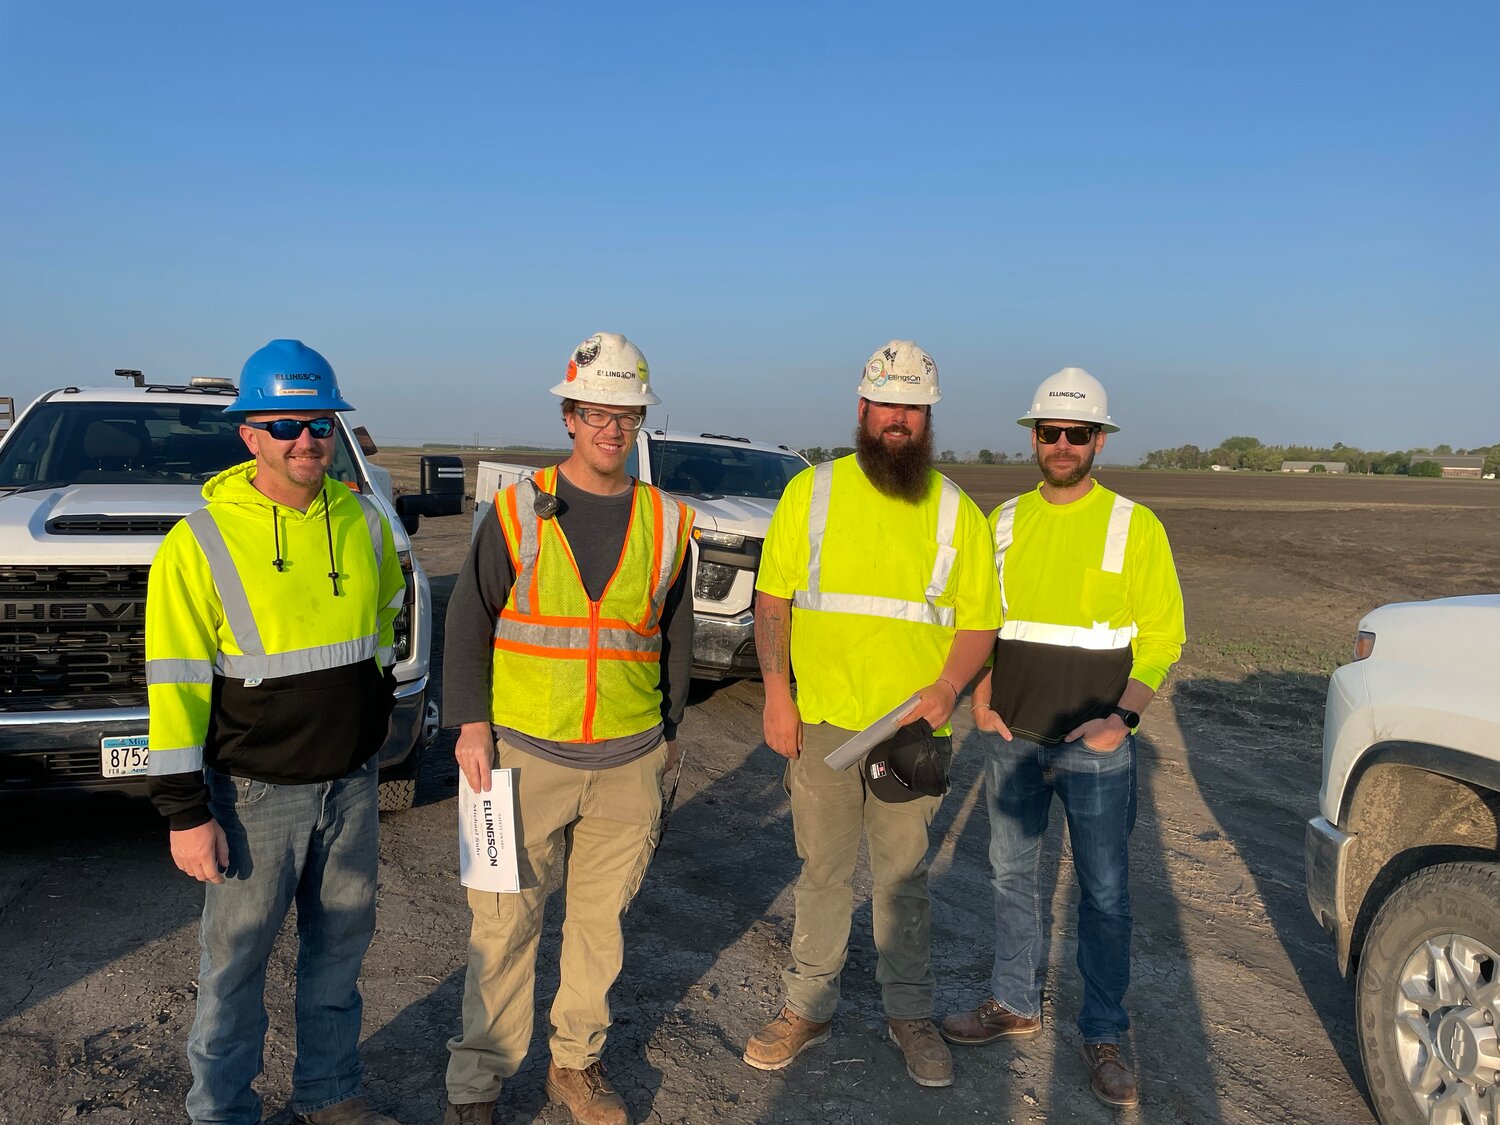 Pictured left to right: Blake Lawrence, Environmental Health & Safety Manager; Michael Suhr, Laborer; Nick Diffendorfer, Foreman; Jason Gillard, Vice President of Operations